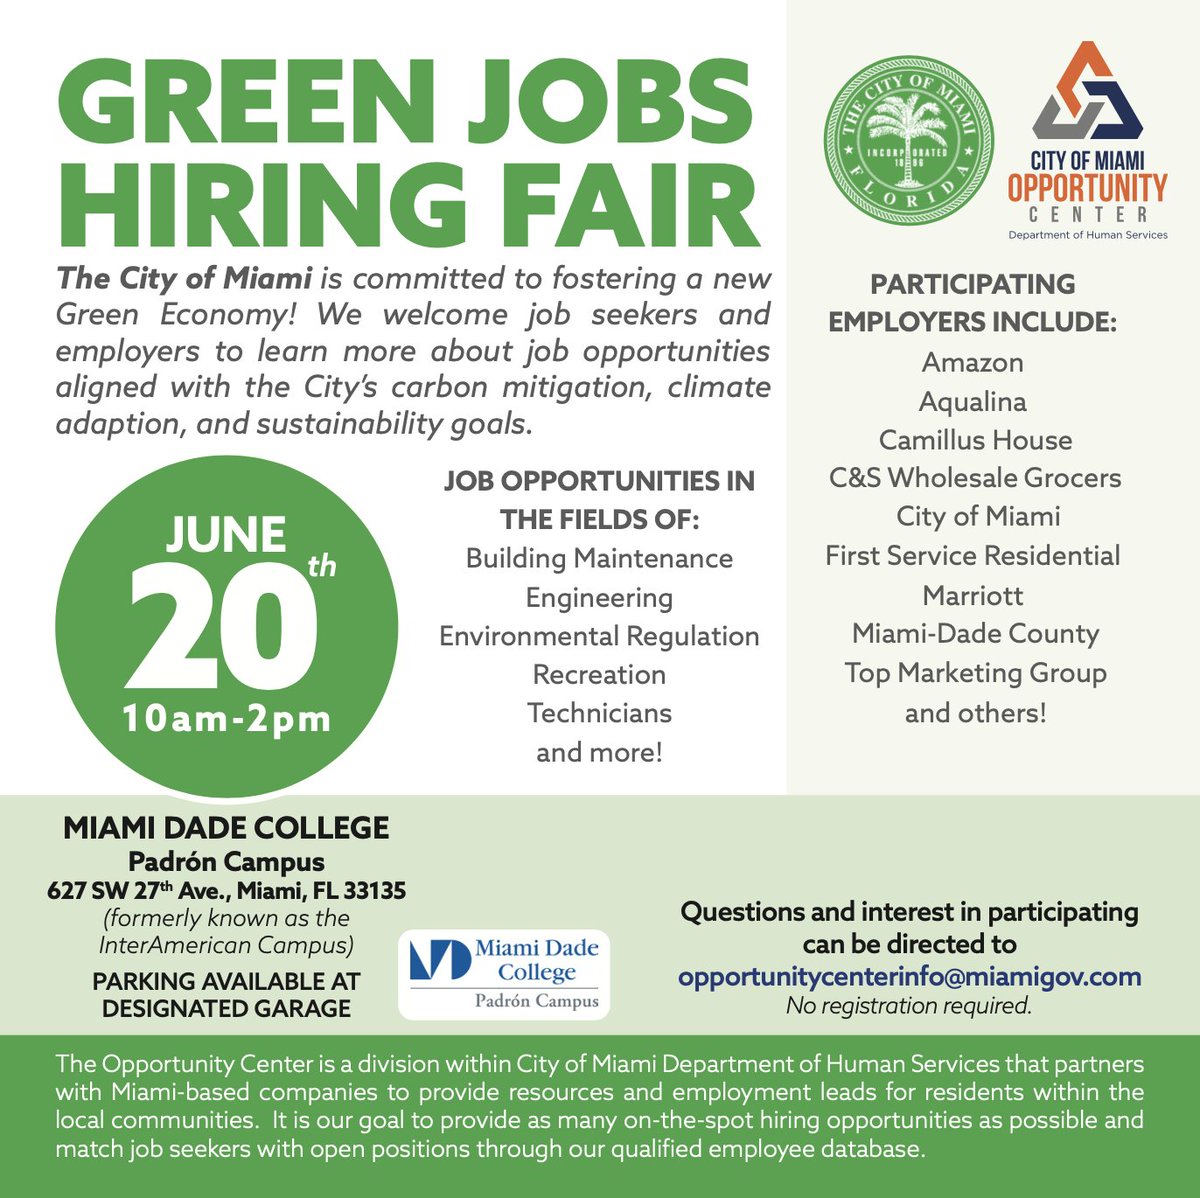 The City of Miami is committed to fostering a new Green Economy! We welcome job seekers and employers to learn more about job opportunities aligned with the City's carbon mitigation, climate adaption, and sustainability goals.

#CityOfMiami #GreenJobsHiringFair